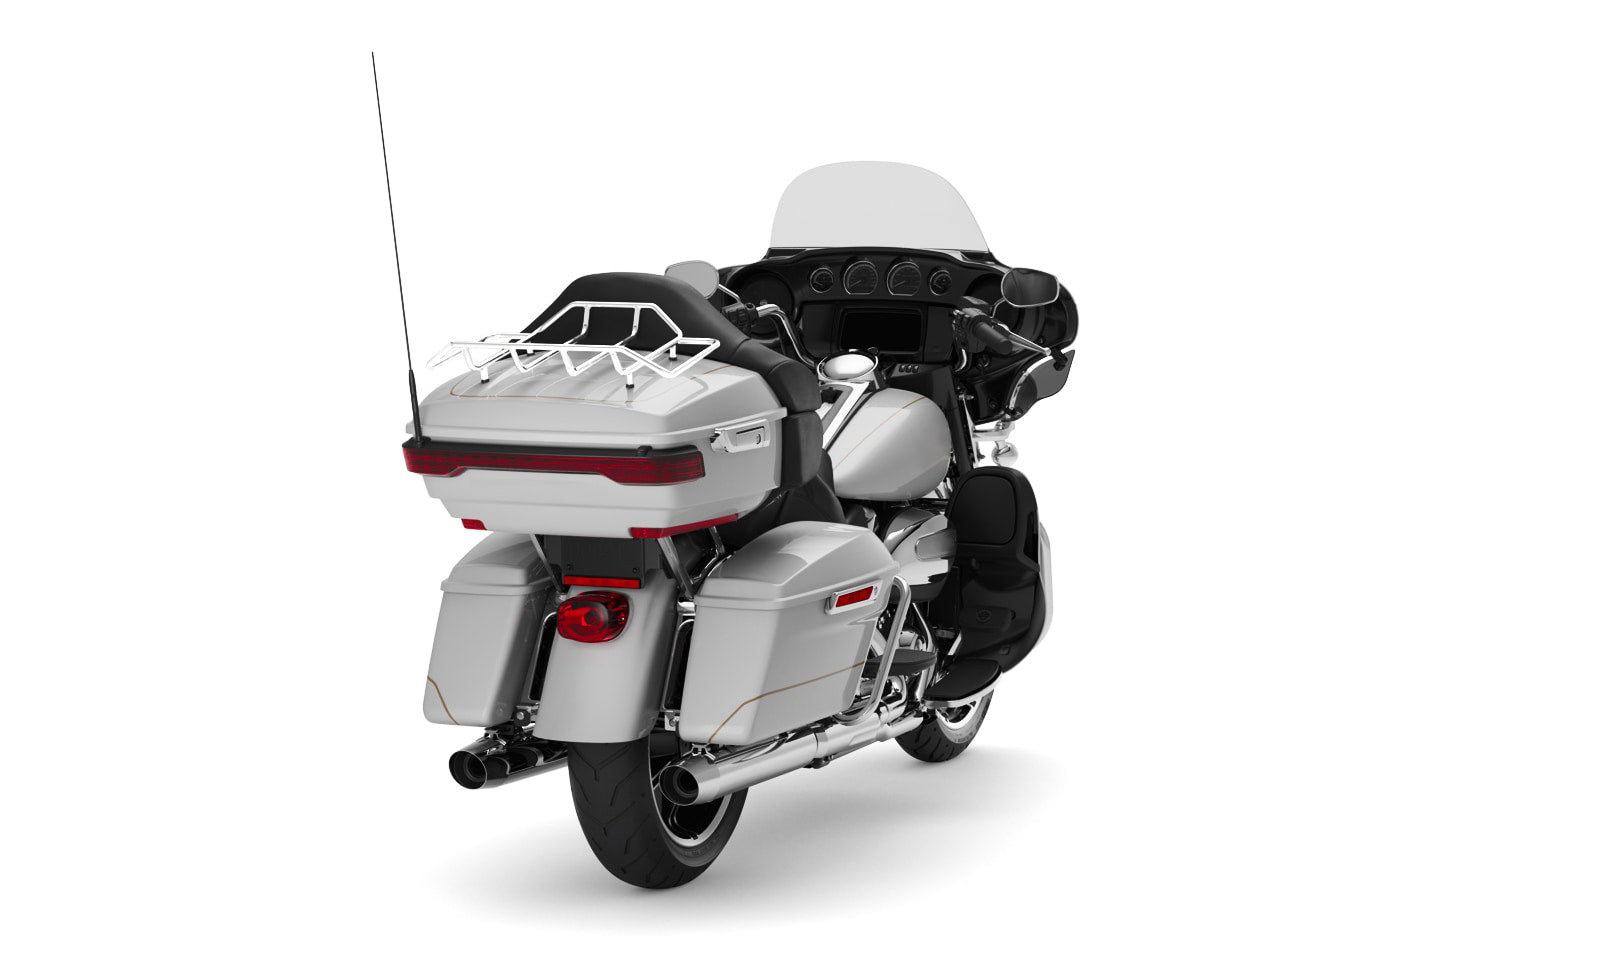 Viking Voyage Tour Pack Luggage Rack for Harley Touring Chrome Bag on Bike View @expand